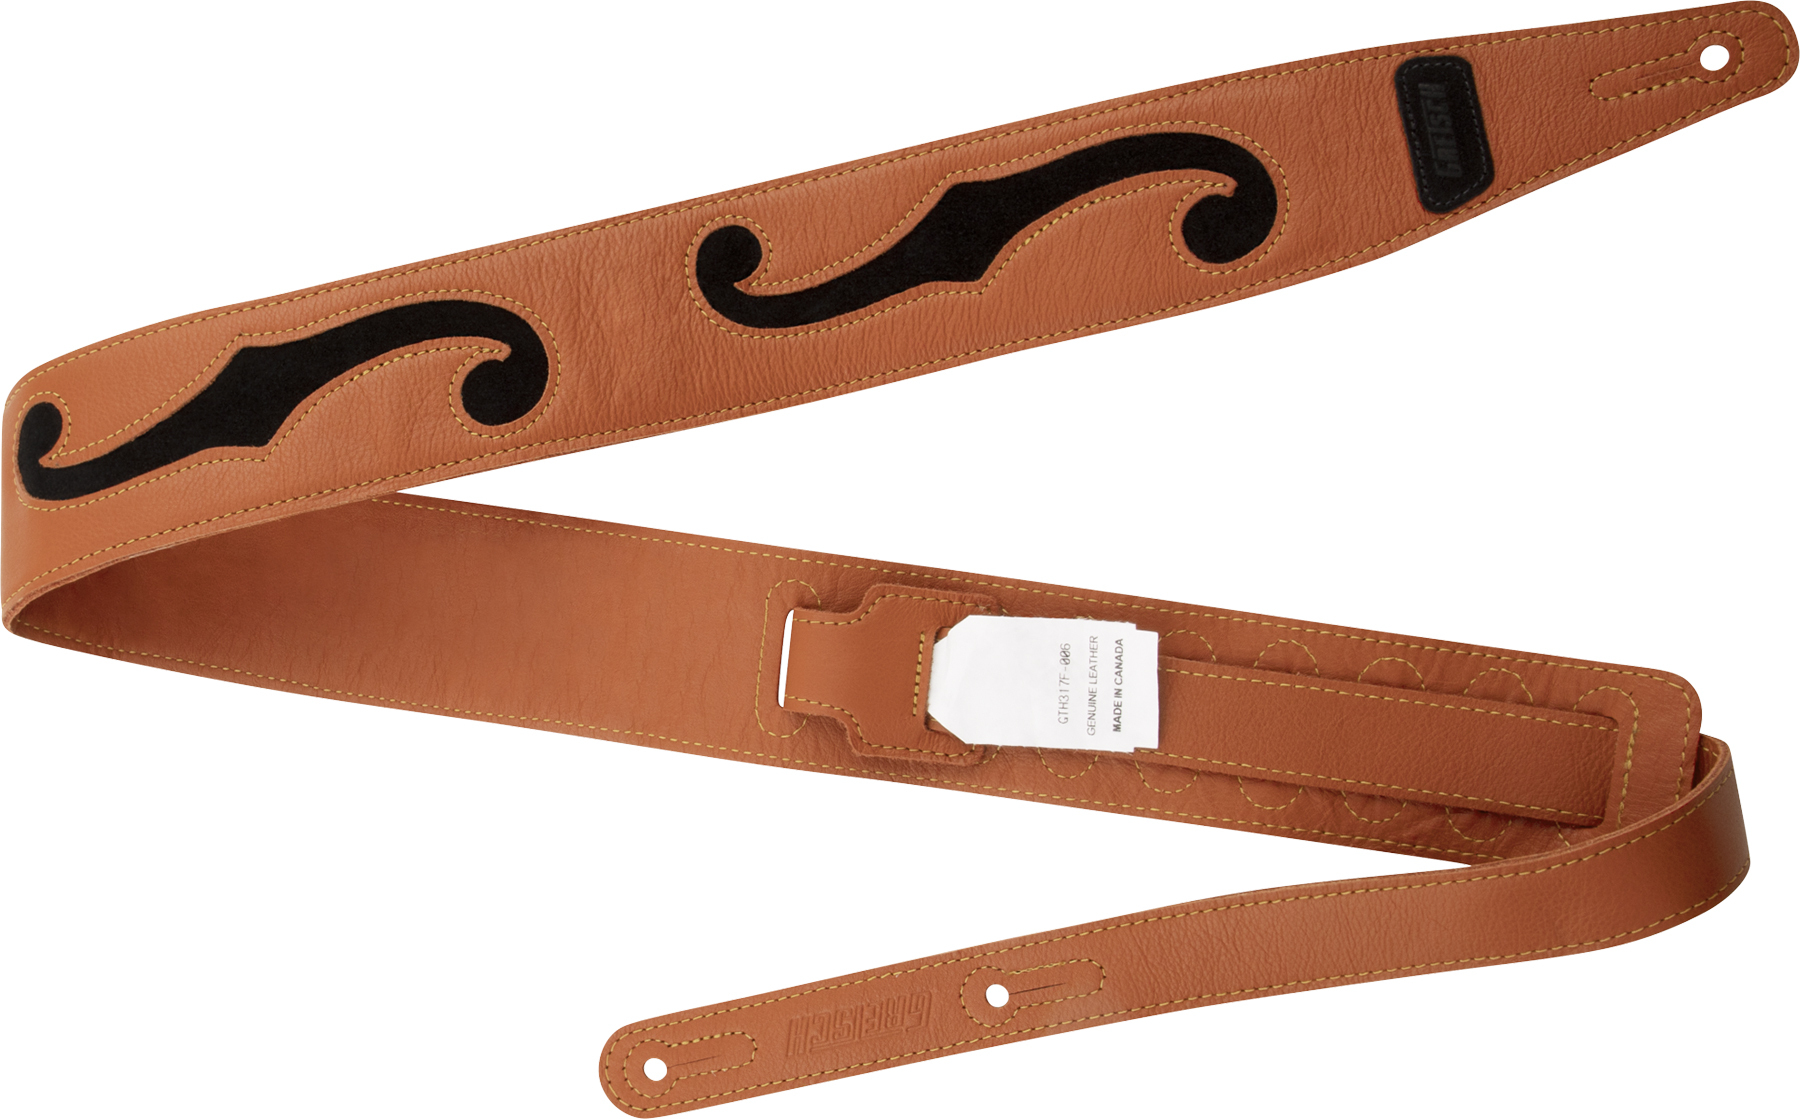 Gretsch F-holes Leather Guitar Strap 3-inch Cuir Orange & Black - Sangle Courroie - Main picture